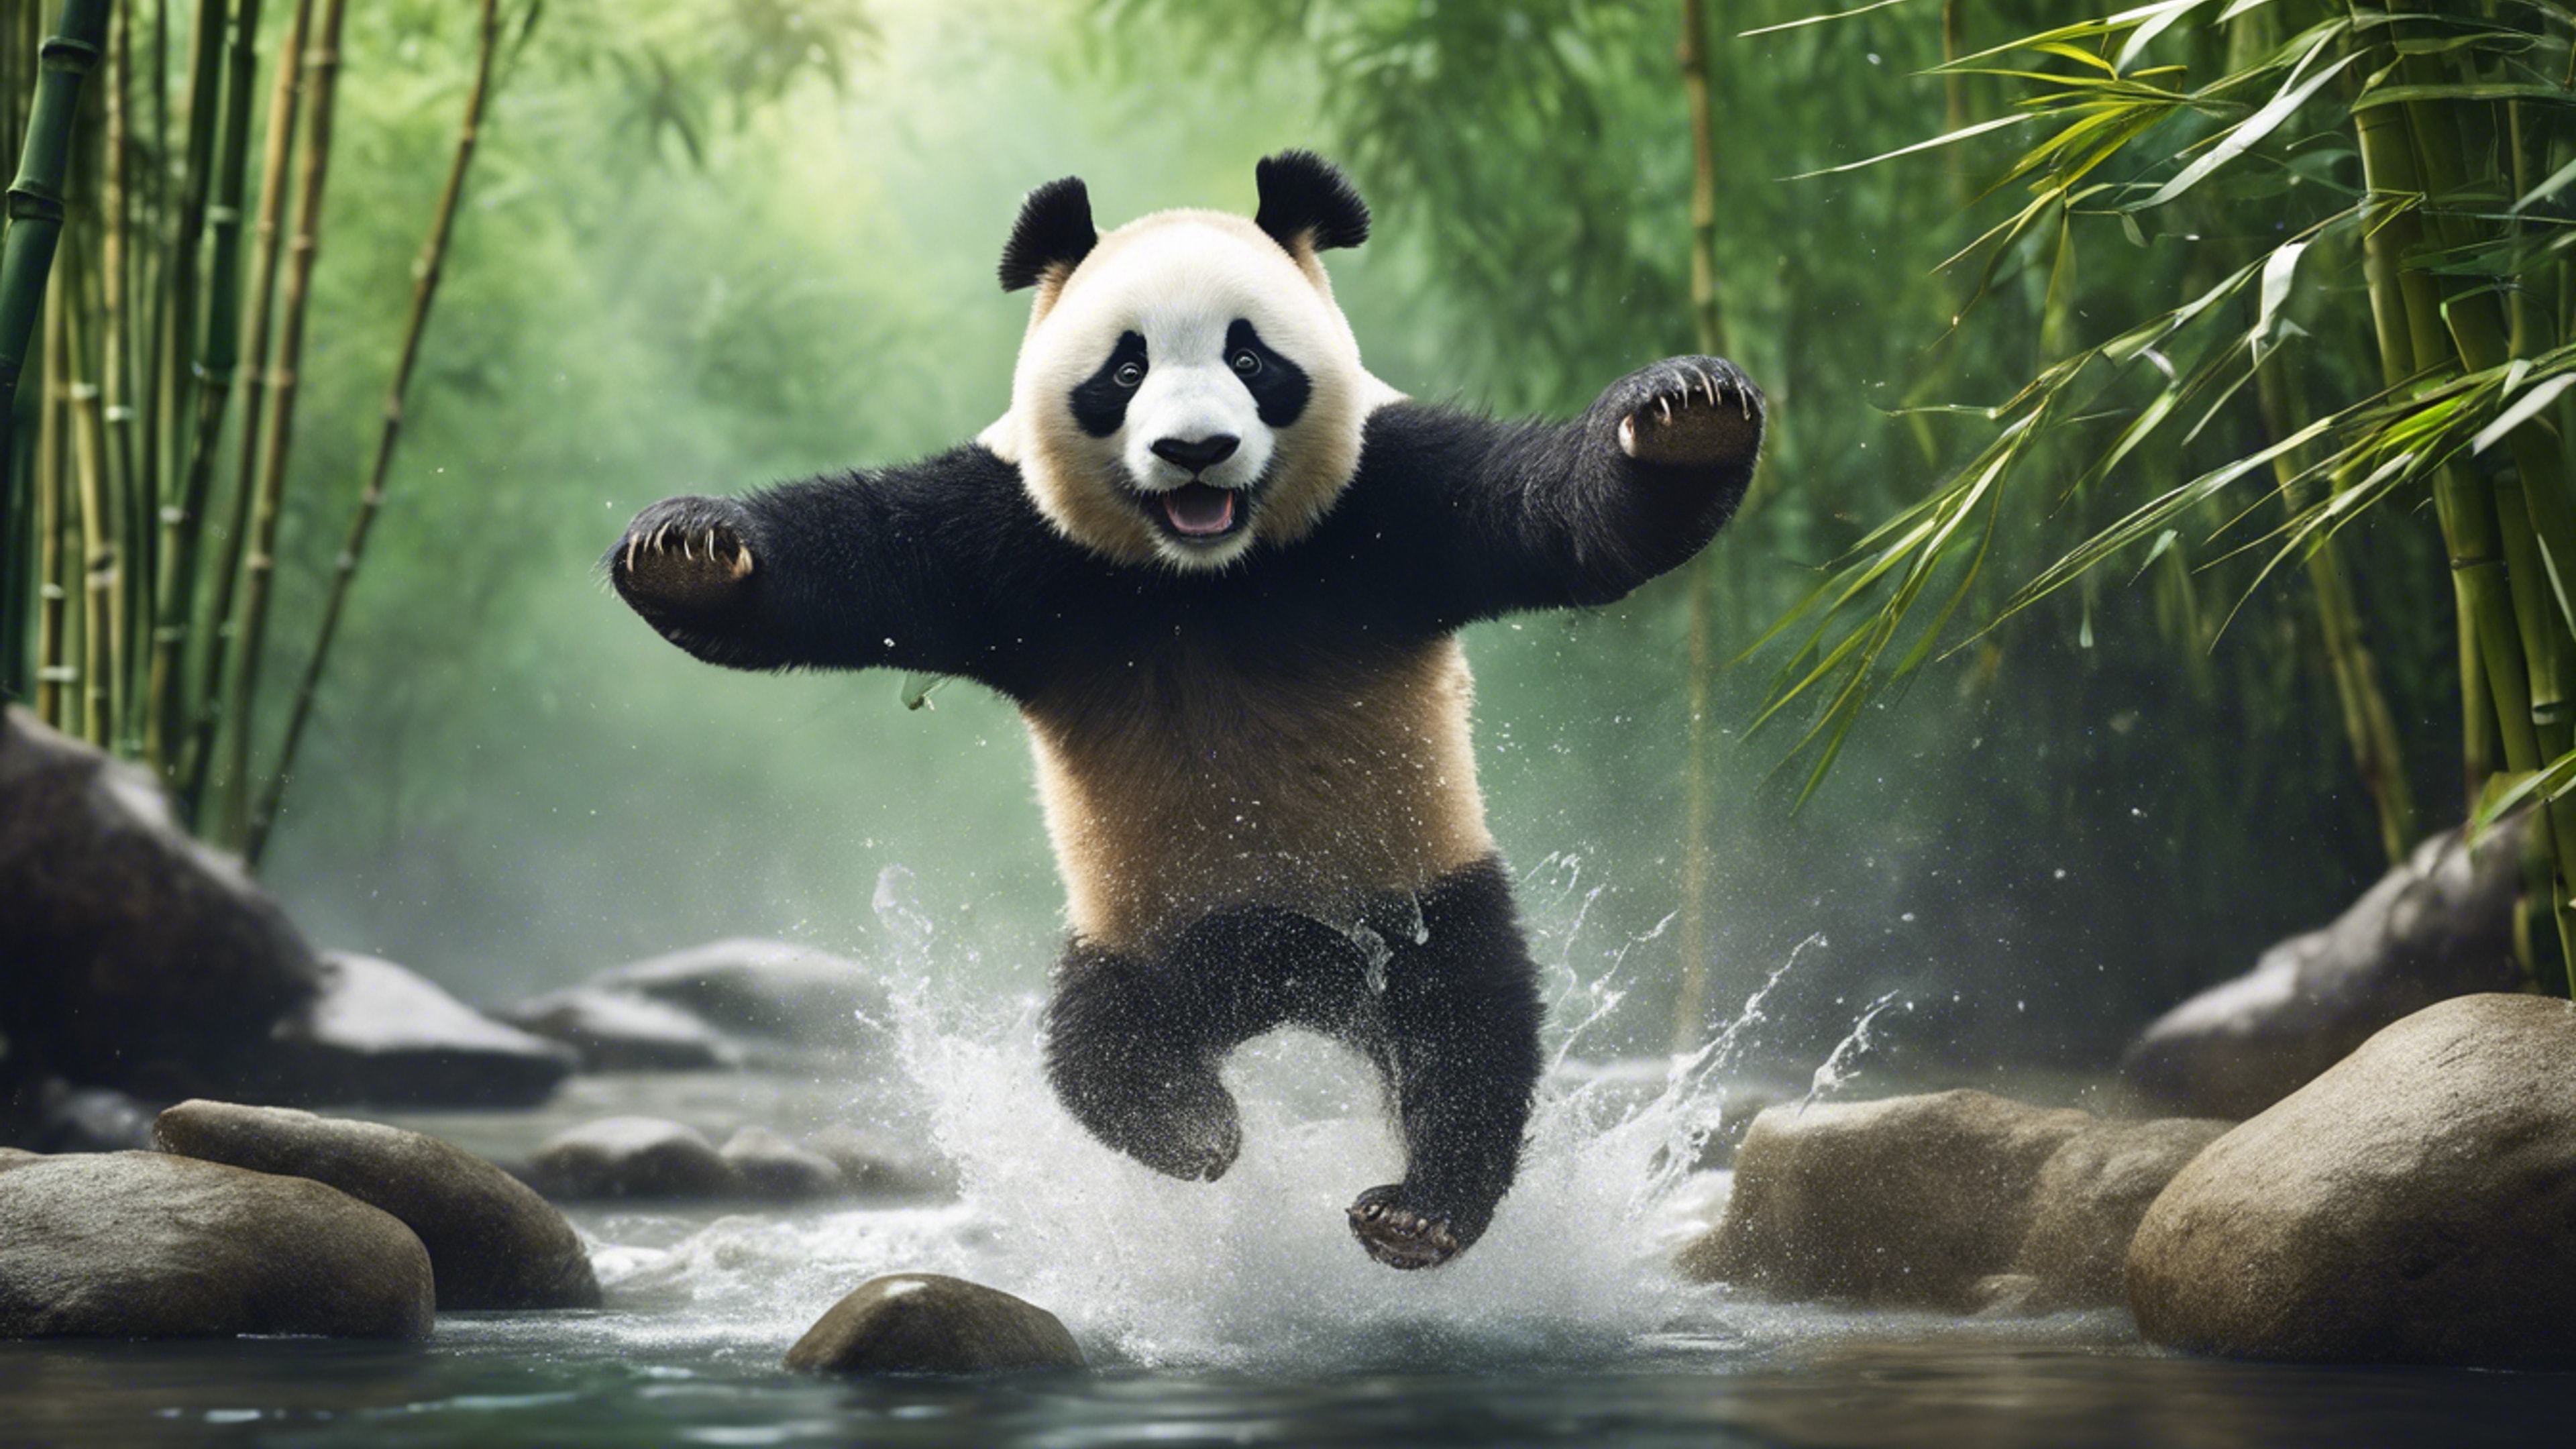 An adventurous panda leaping across a rapid creek with bamboo forests in the backdrop. ورق الجدران[317eaaa1af264f04a7c3]